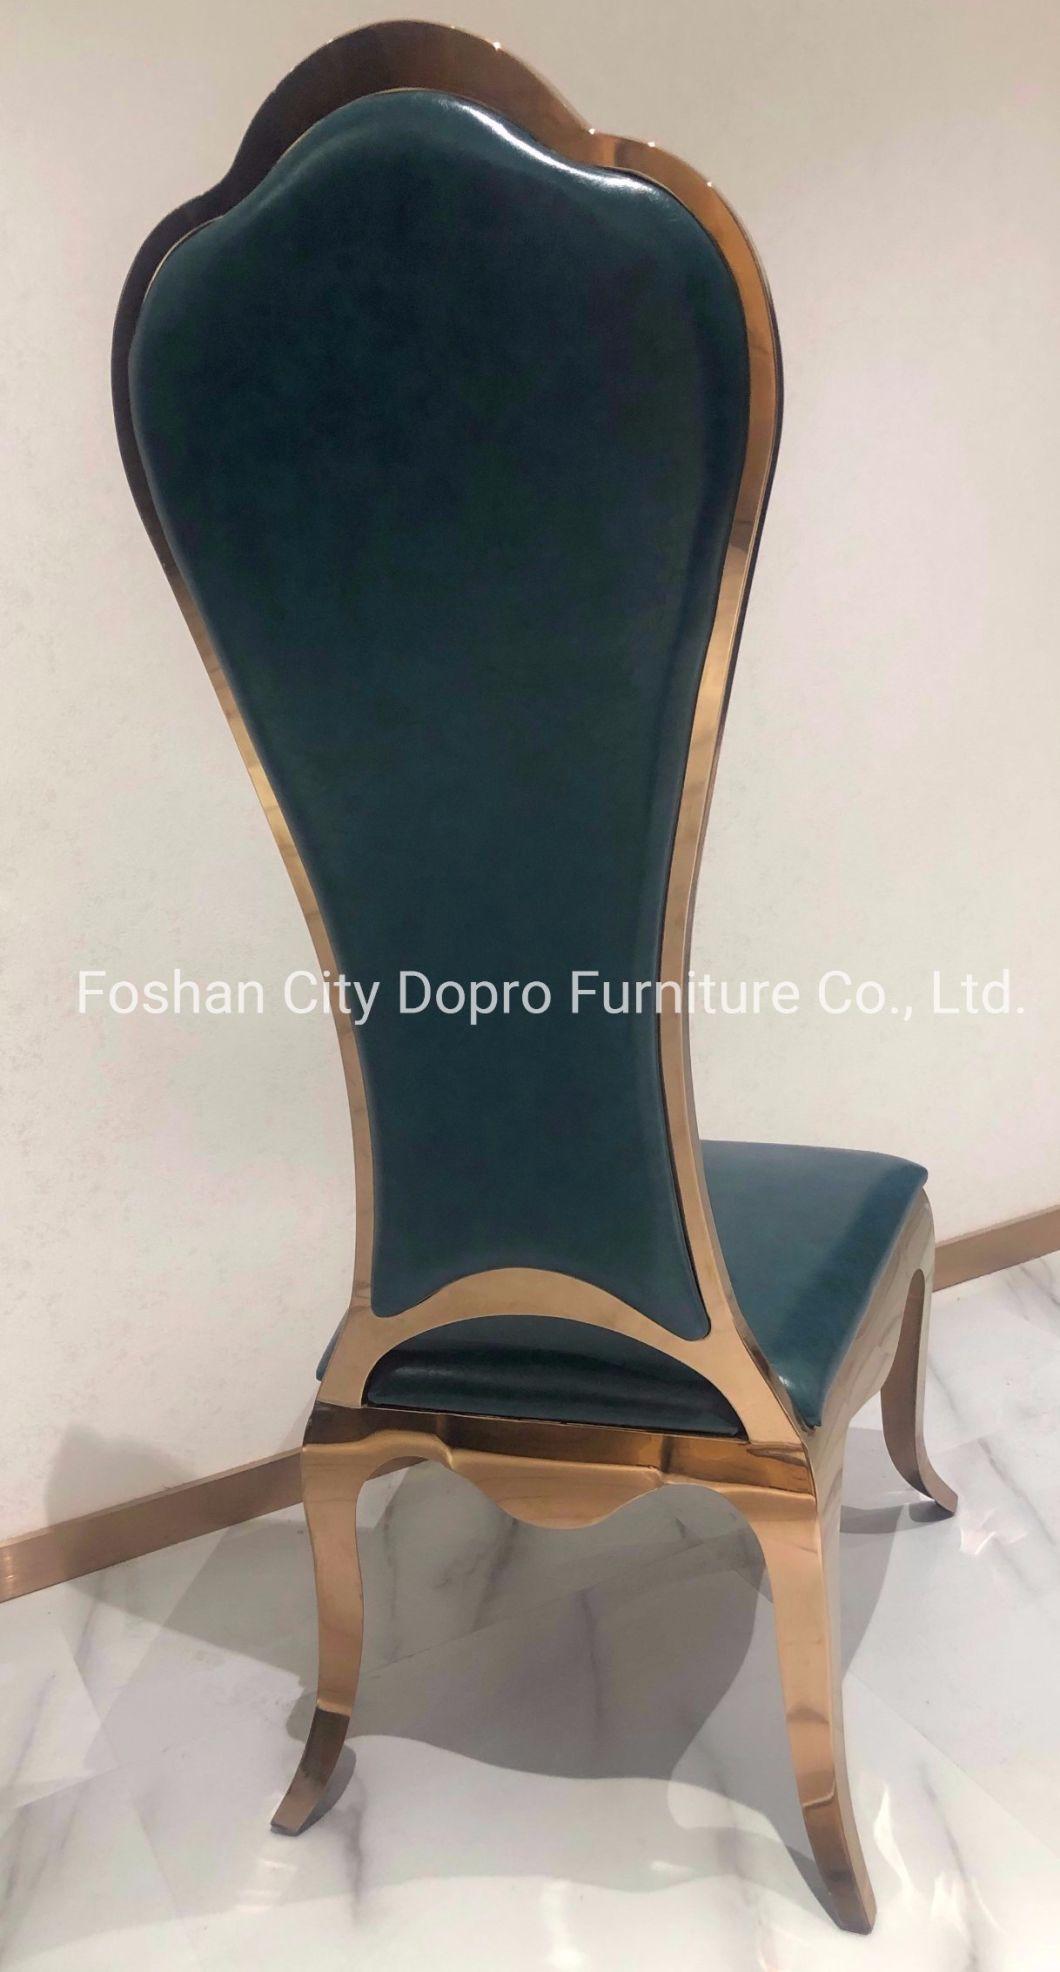 Luxury Stainless Steel Golden High Back Chair for Wedding and Hotel